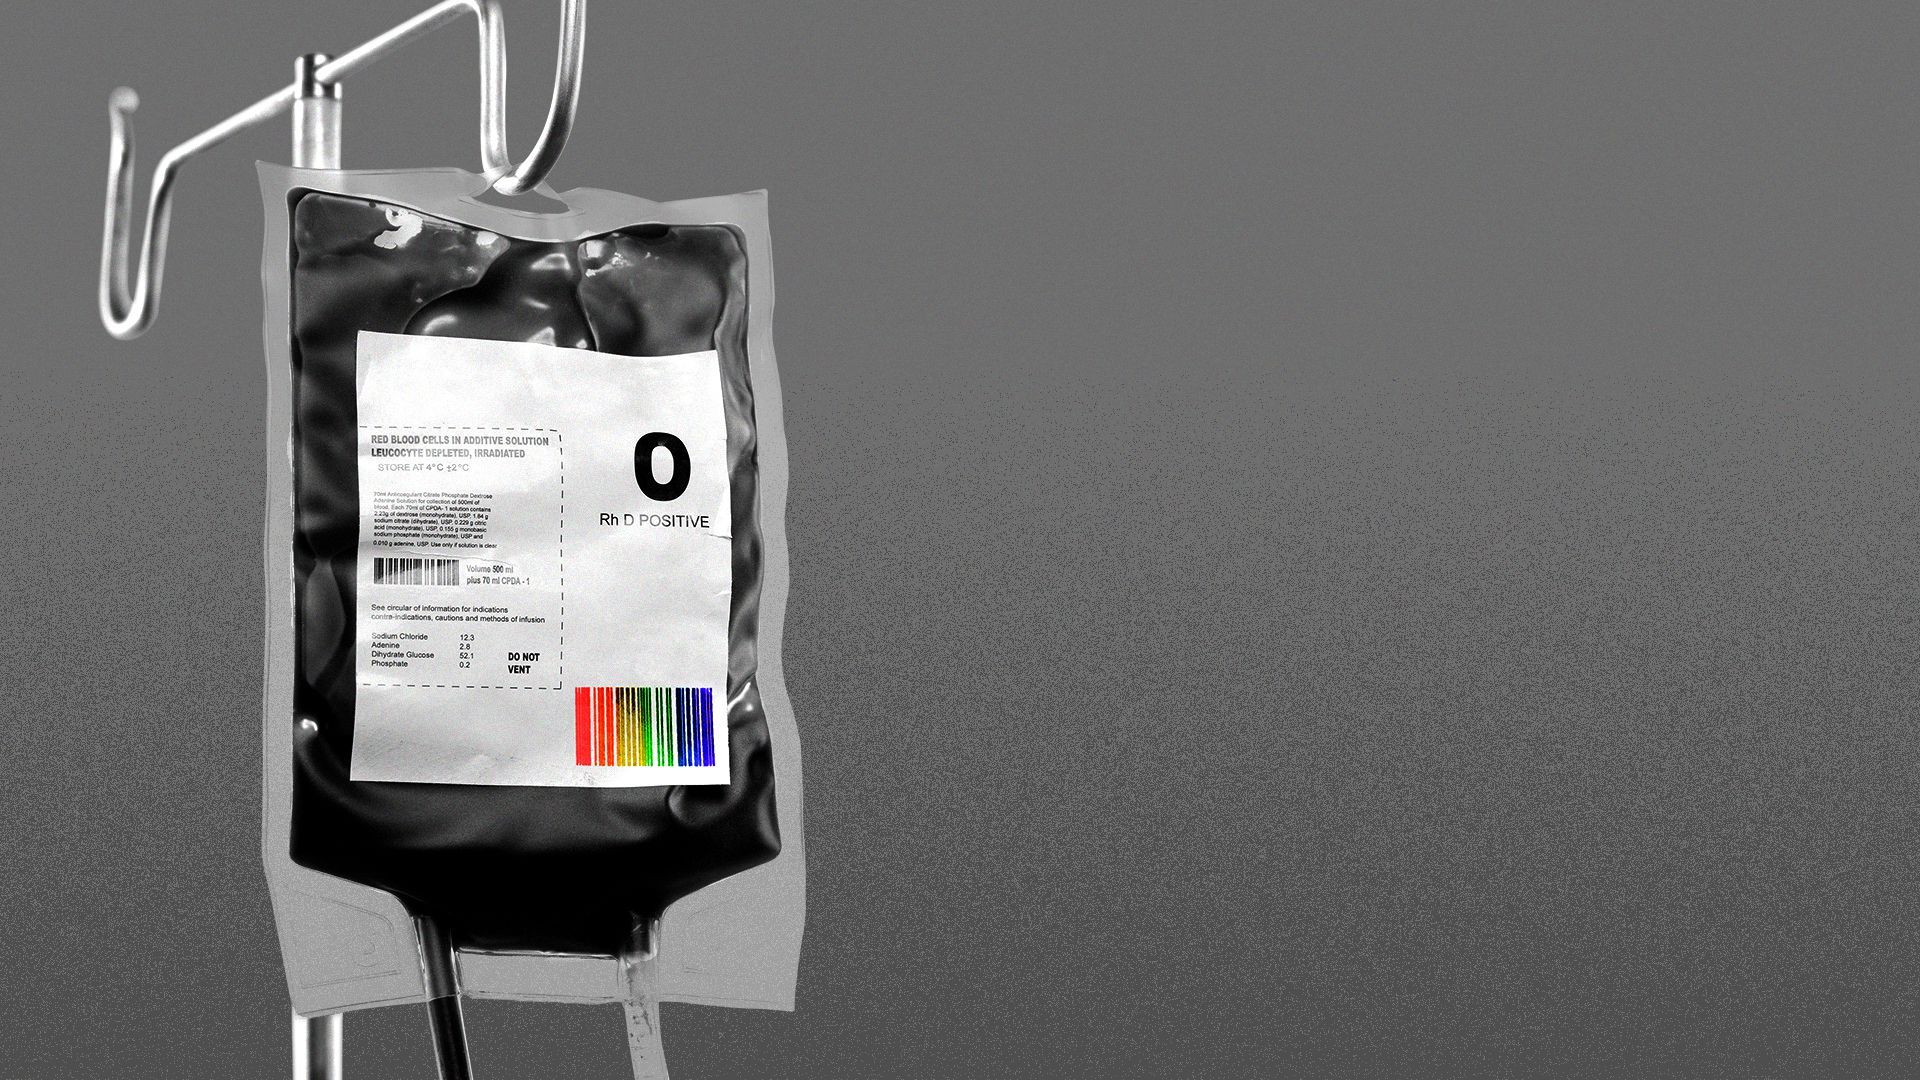 Illustration of a blood bag with a rainbow barcode.